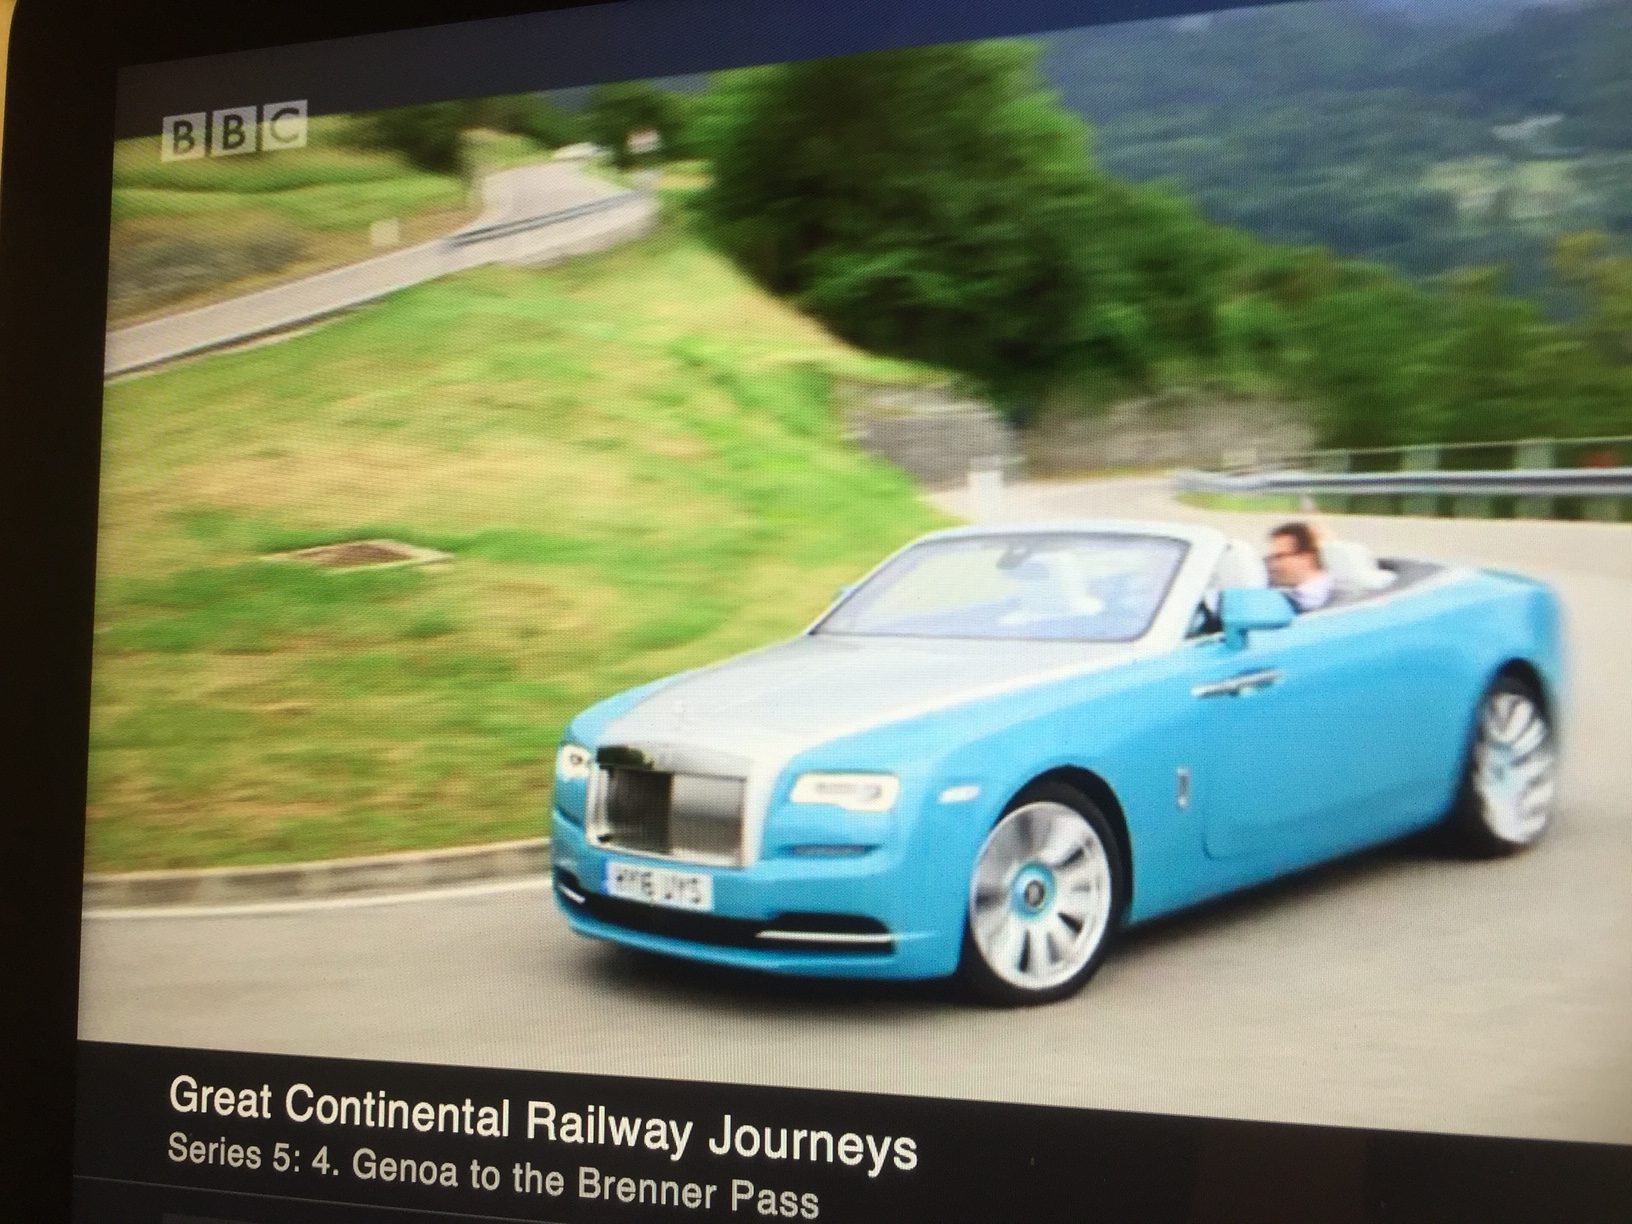 Bobby 2: The Best Car in the World. A Rolls Royce Dawn with Michael Portillo.